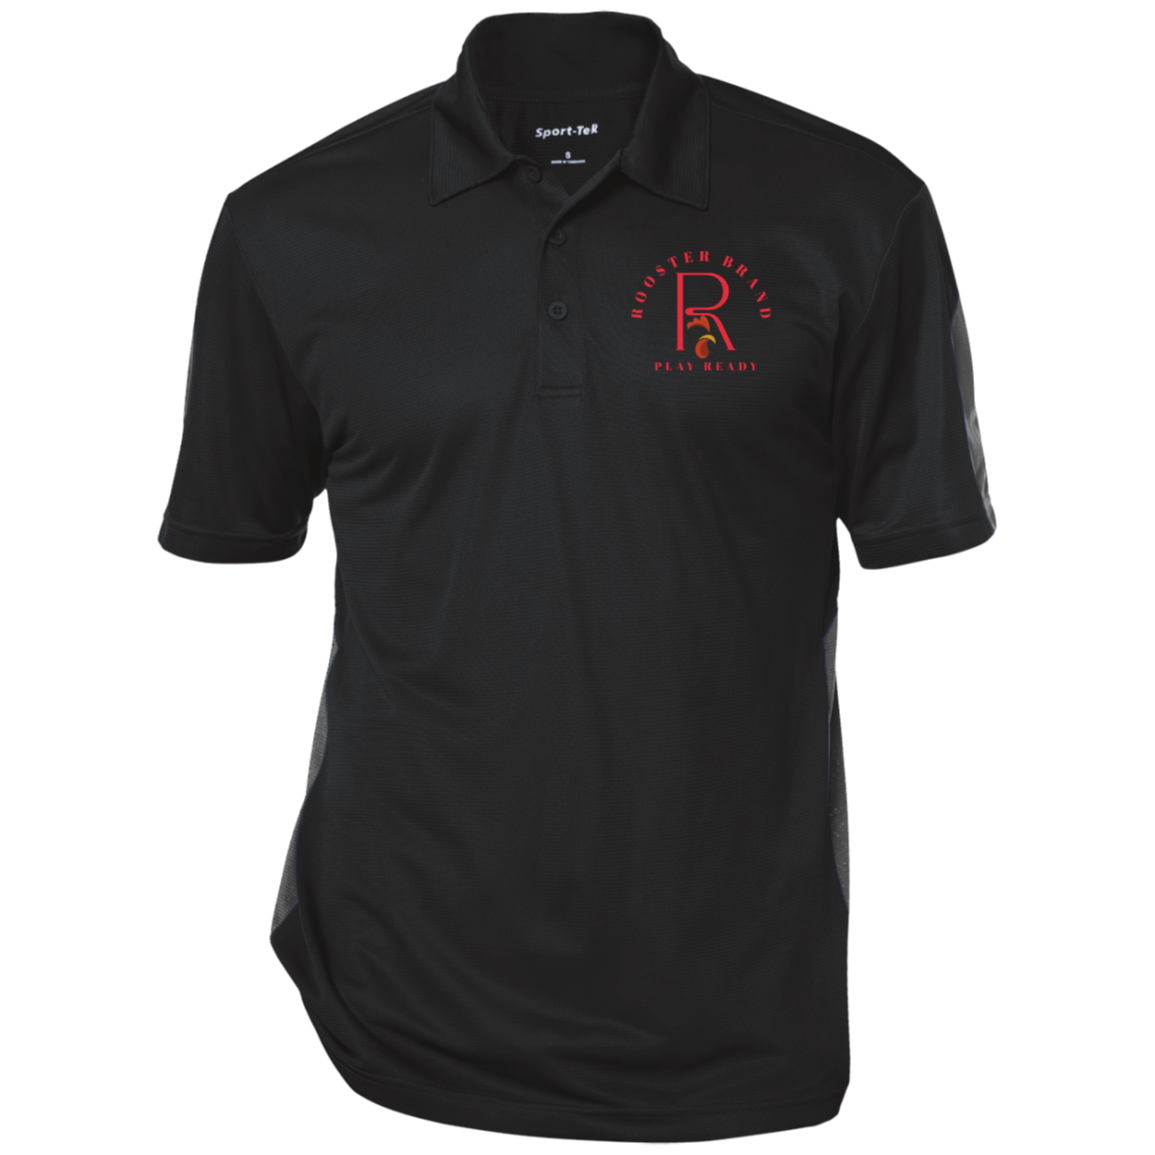 Roo$ter Brand Performance Textured Three-Button Polo